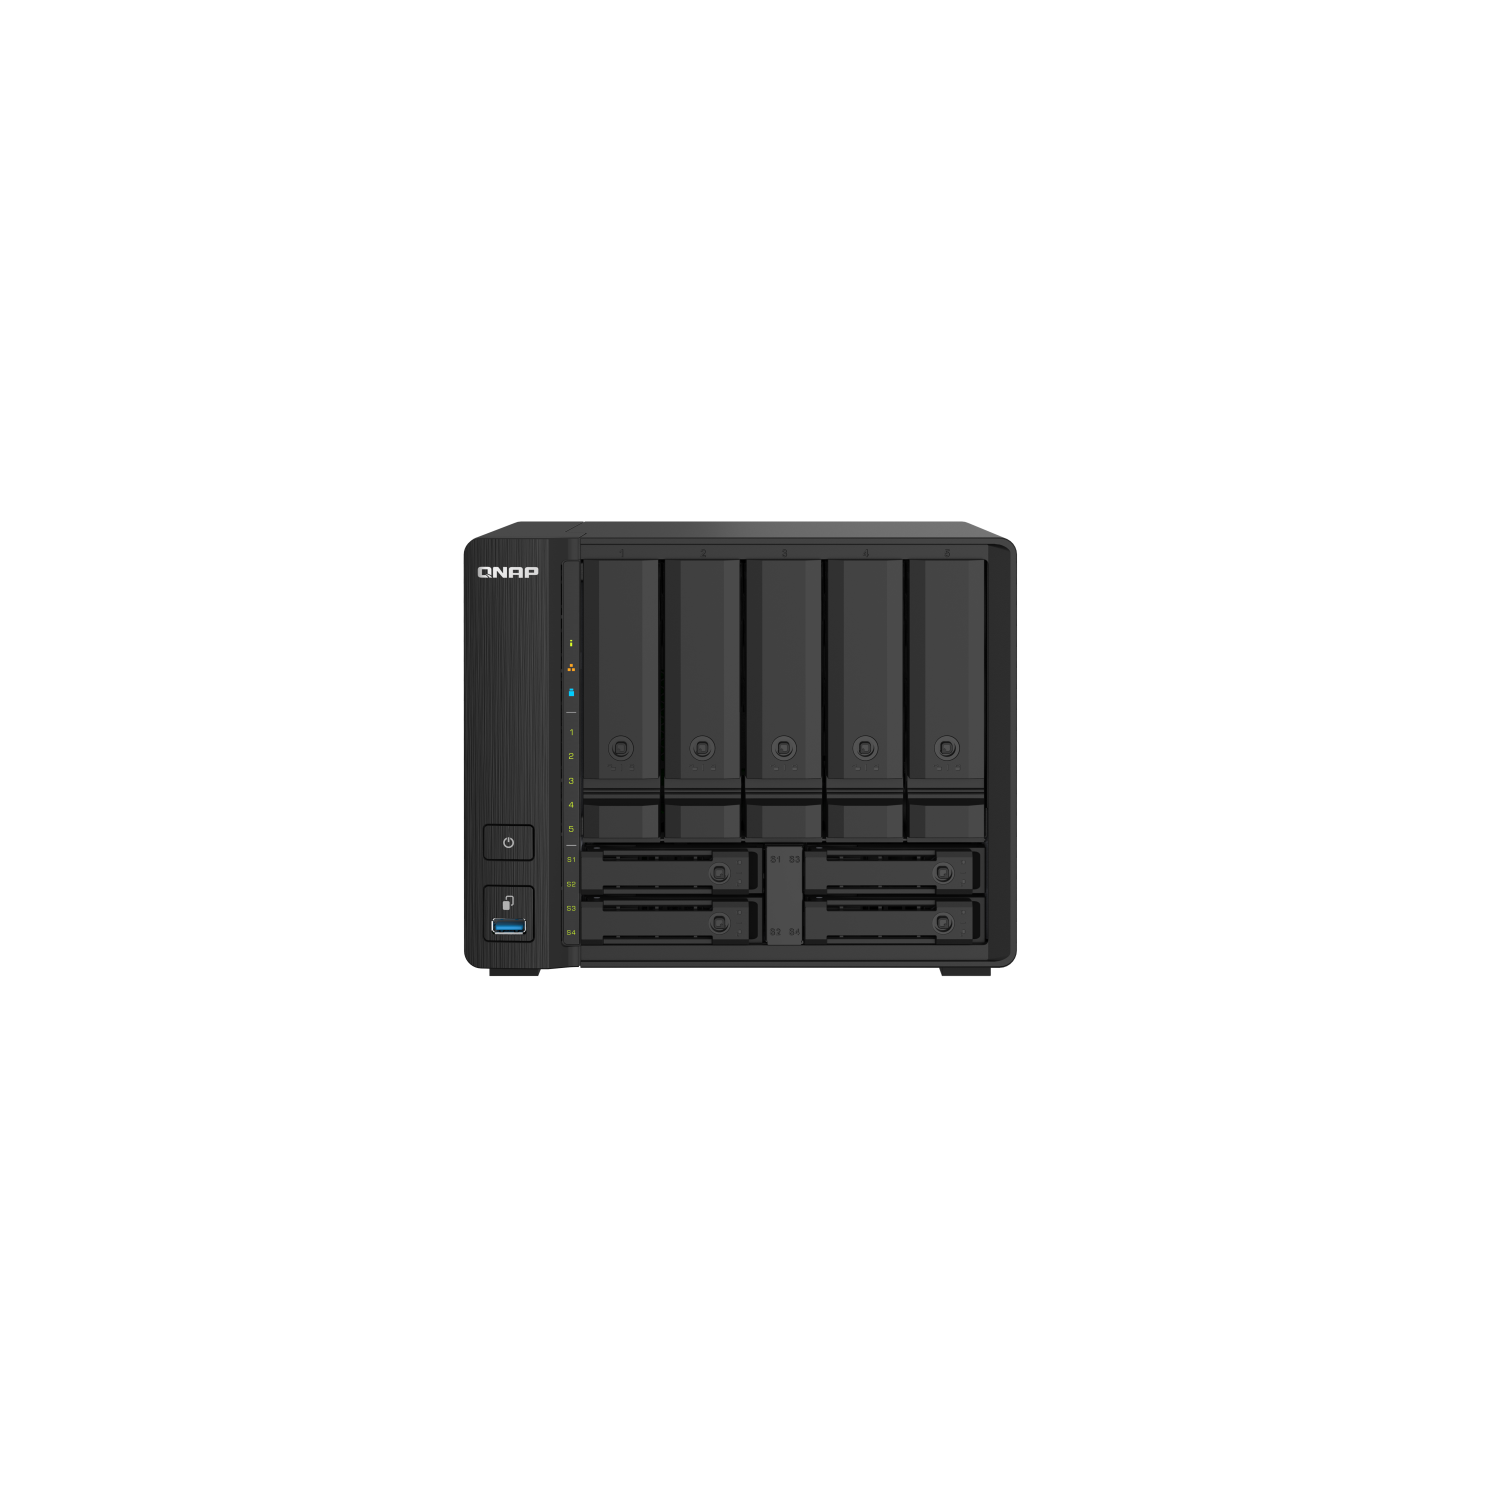 QNAP TS-932PX-4G 5+4 Bay High-Speed NAS with Two 10GbE and 2.5GbE Ports